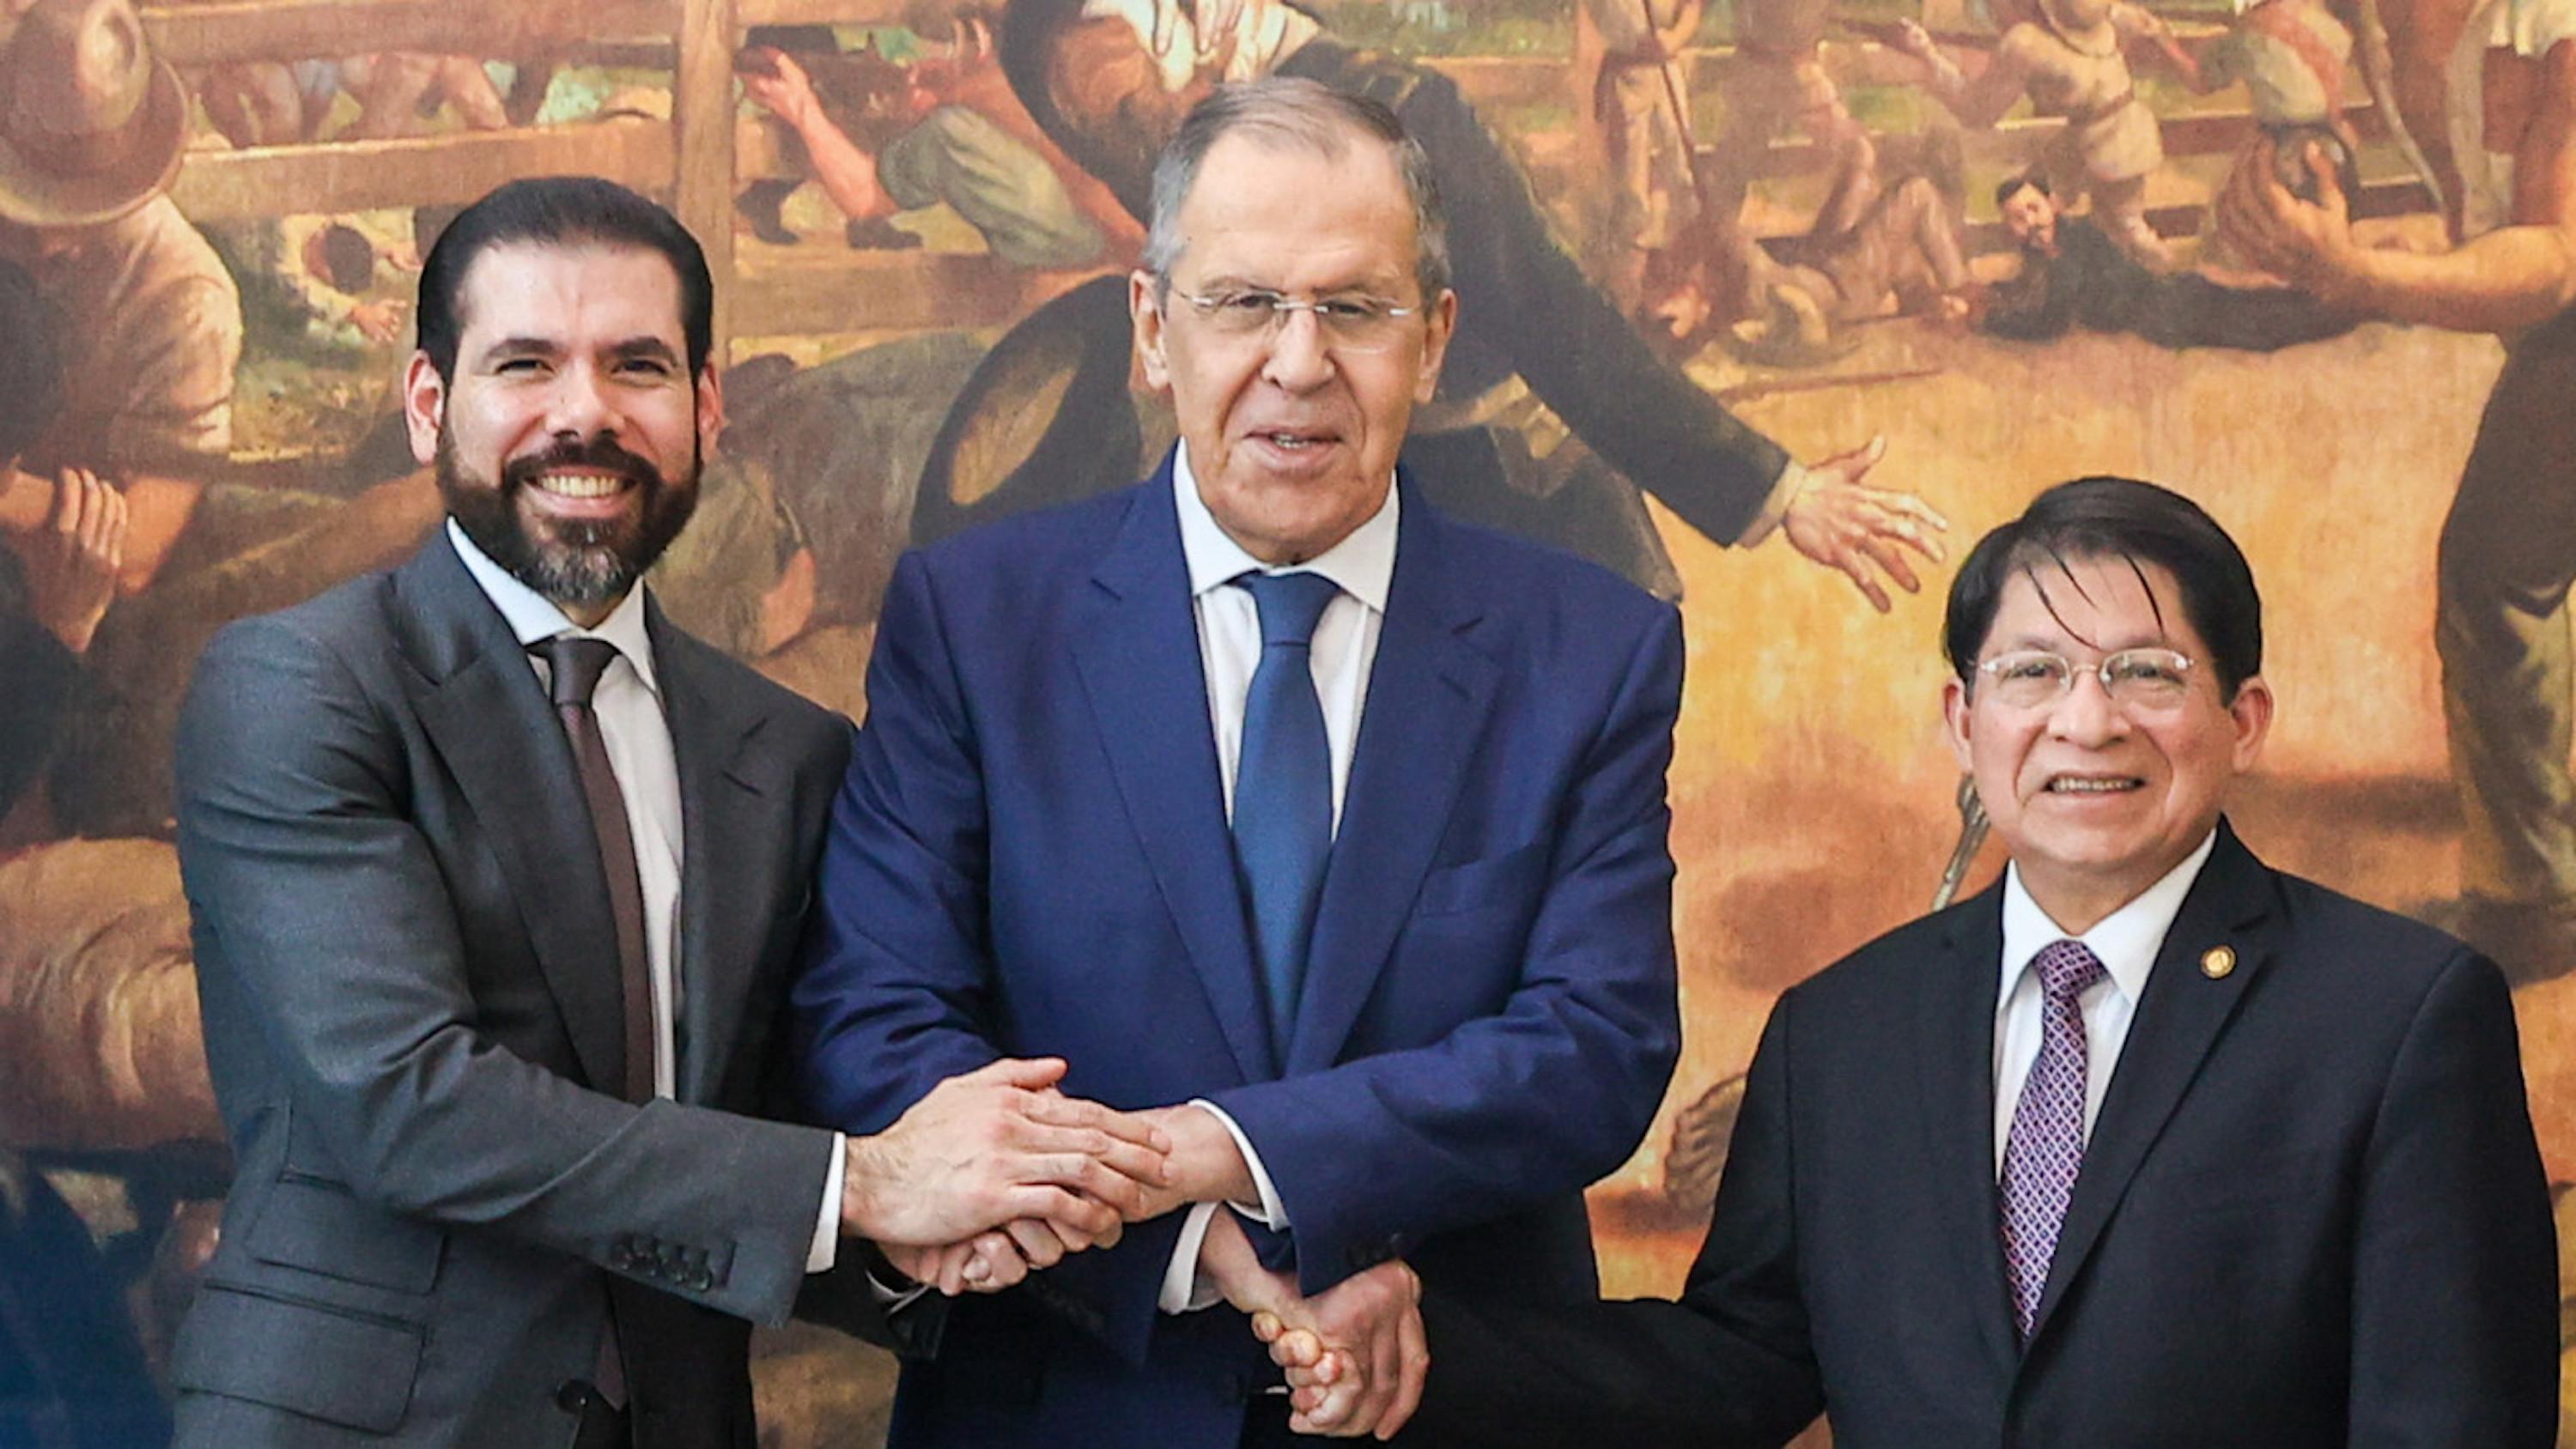 From left to right: Laureano Ortega, the son of presidential couple Daniel Ortega and Rosario Murillo and envoy for Russian affairs; Russian Foreign Minister Sergei Lavrov; and Nicaraguan Foreign Minister Denis Moncada during a state visit in Managua on Apr. 19, 2023. Photo: Russian Foreign Ministry/TASS